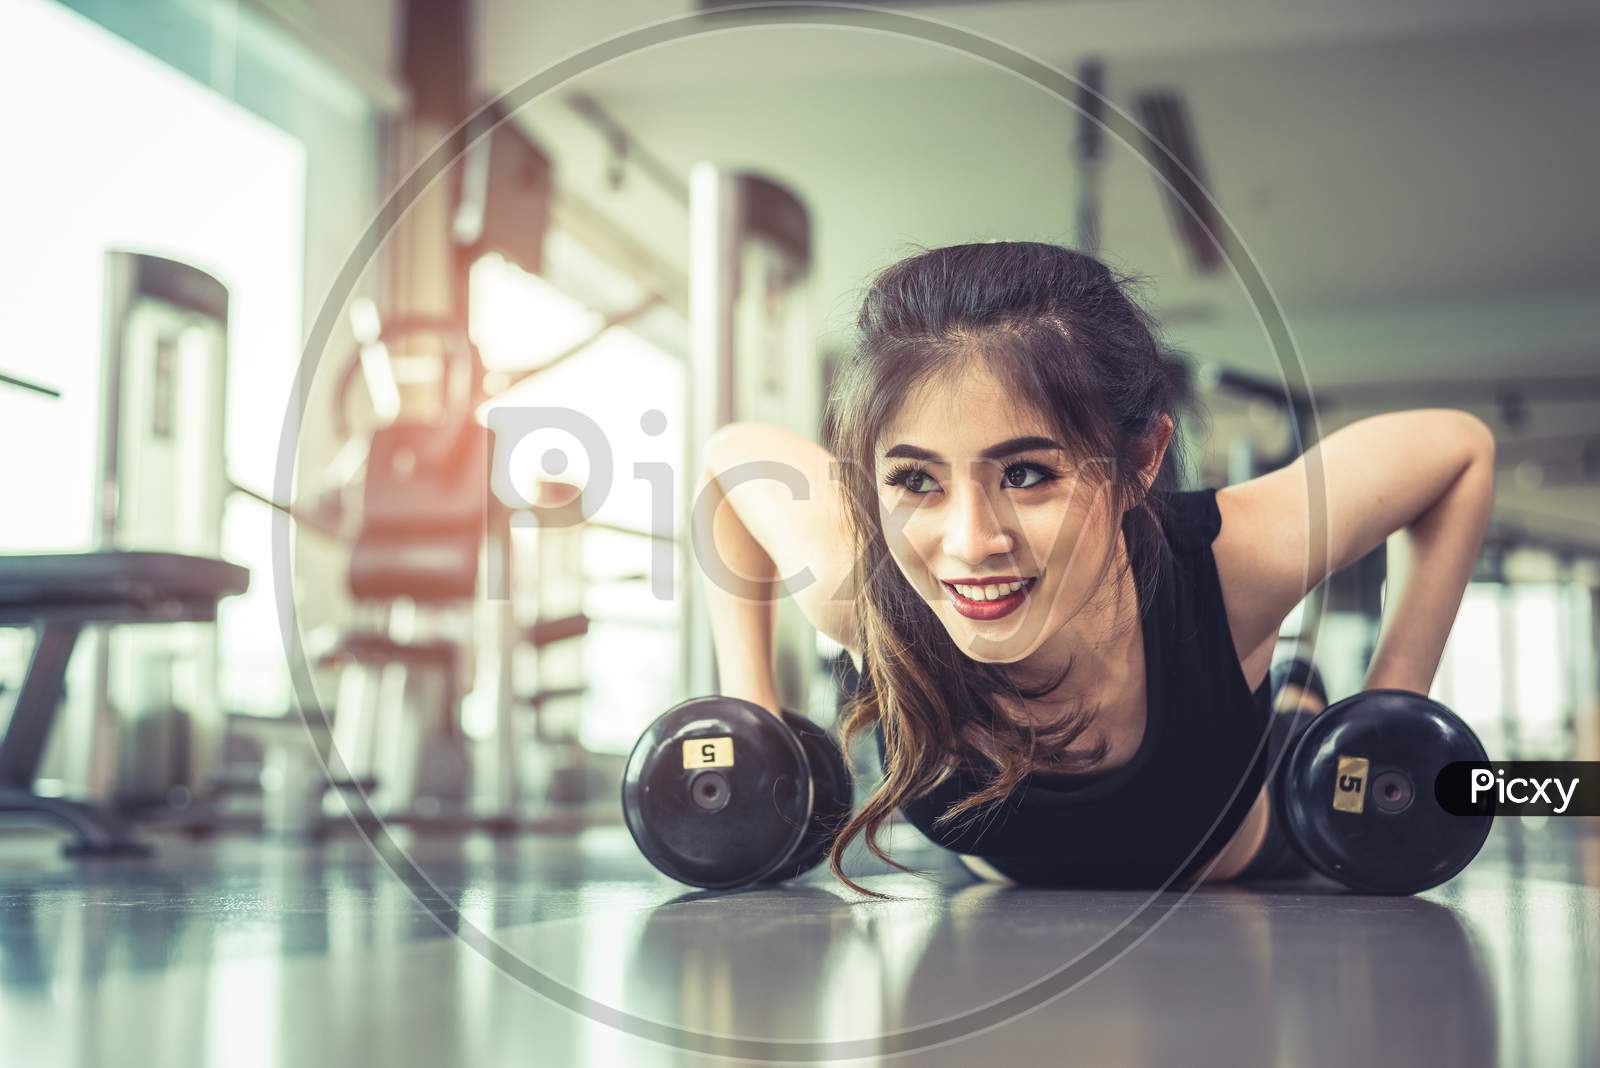 Asian Young Woman Doing Push Ups With Dumbbell On Floor In Fitness Gym And Equipment Background. Workout And Sport Exercise Concept. Healthy And Happiness Concept. Beauty And Body Build Up Theme.